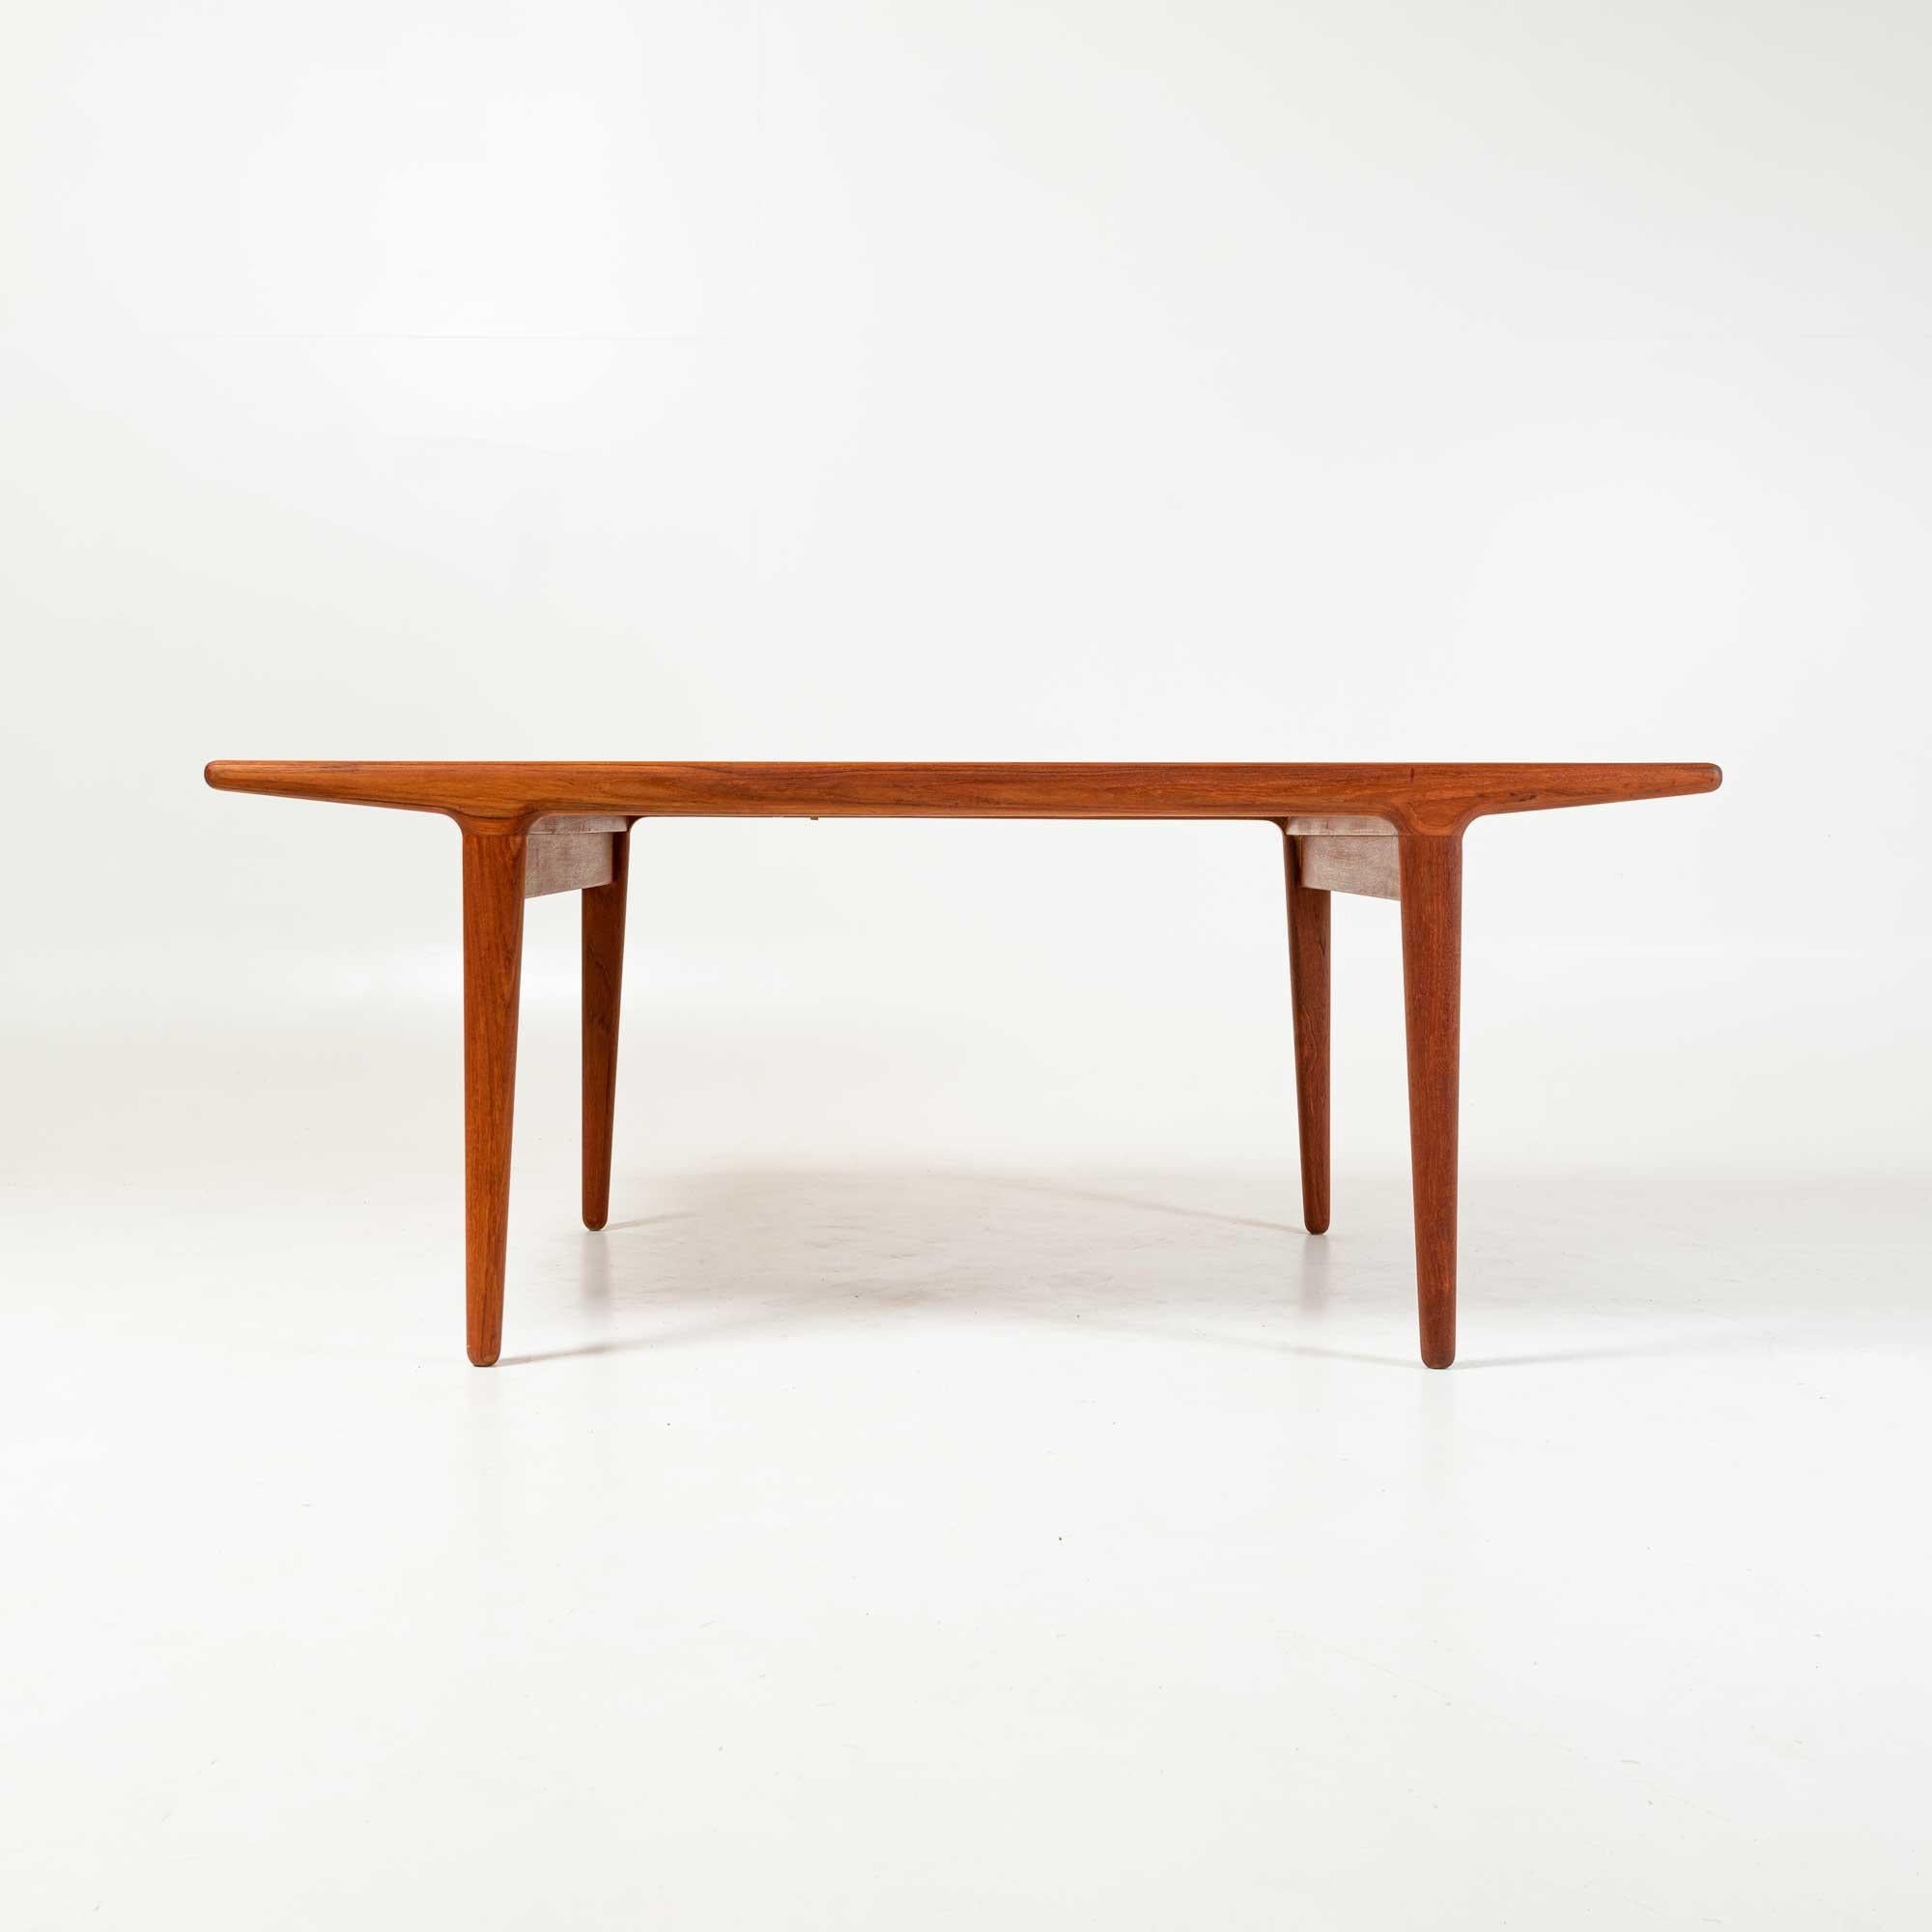 A dining table in teak designed by Johannes Andersen for with clever hidden drawers on both ends concealing two large leaves. The table can accommodate up to 10 seating with extended leaves, or 6 without extended leaves.

Measures: length with